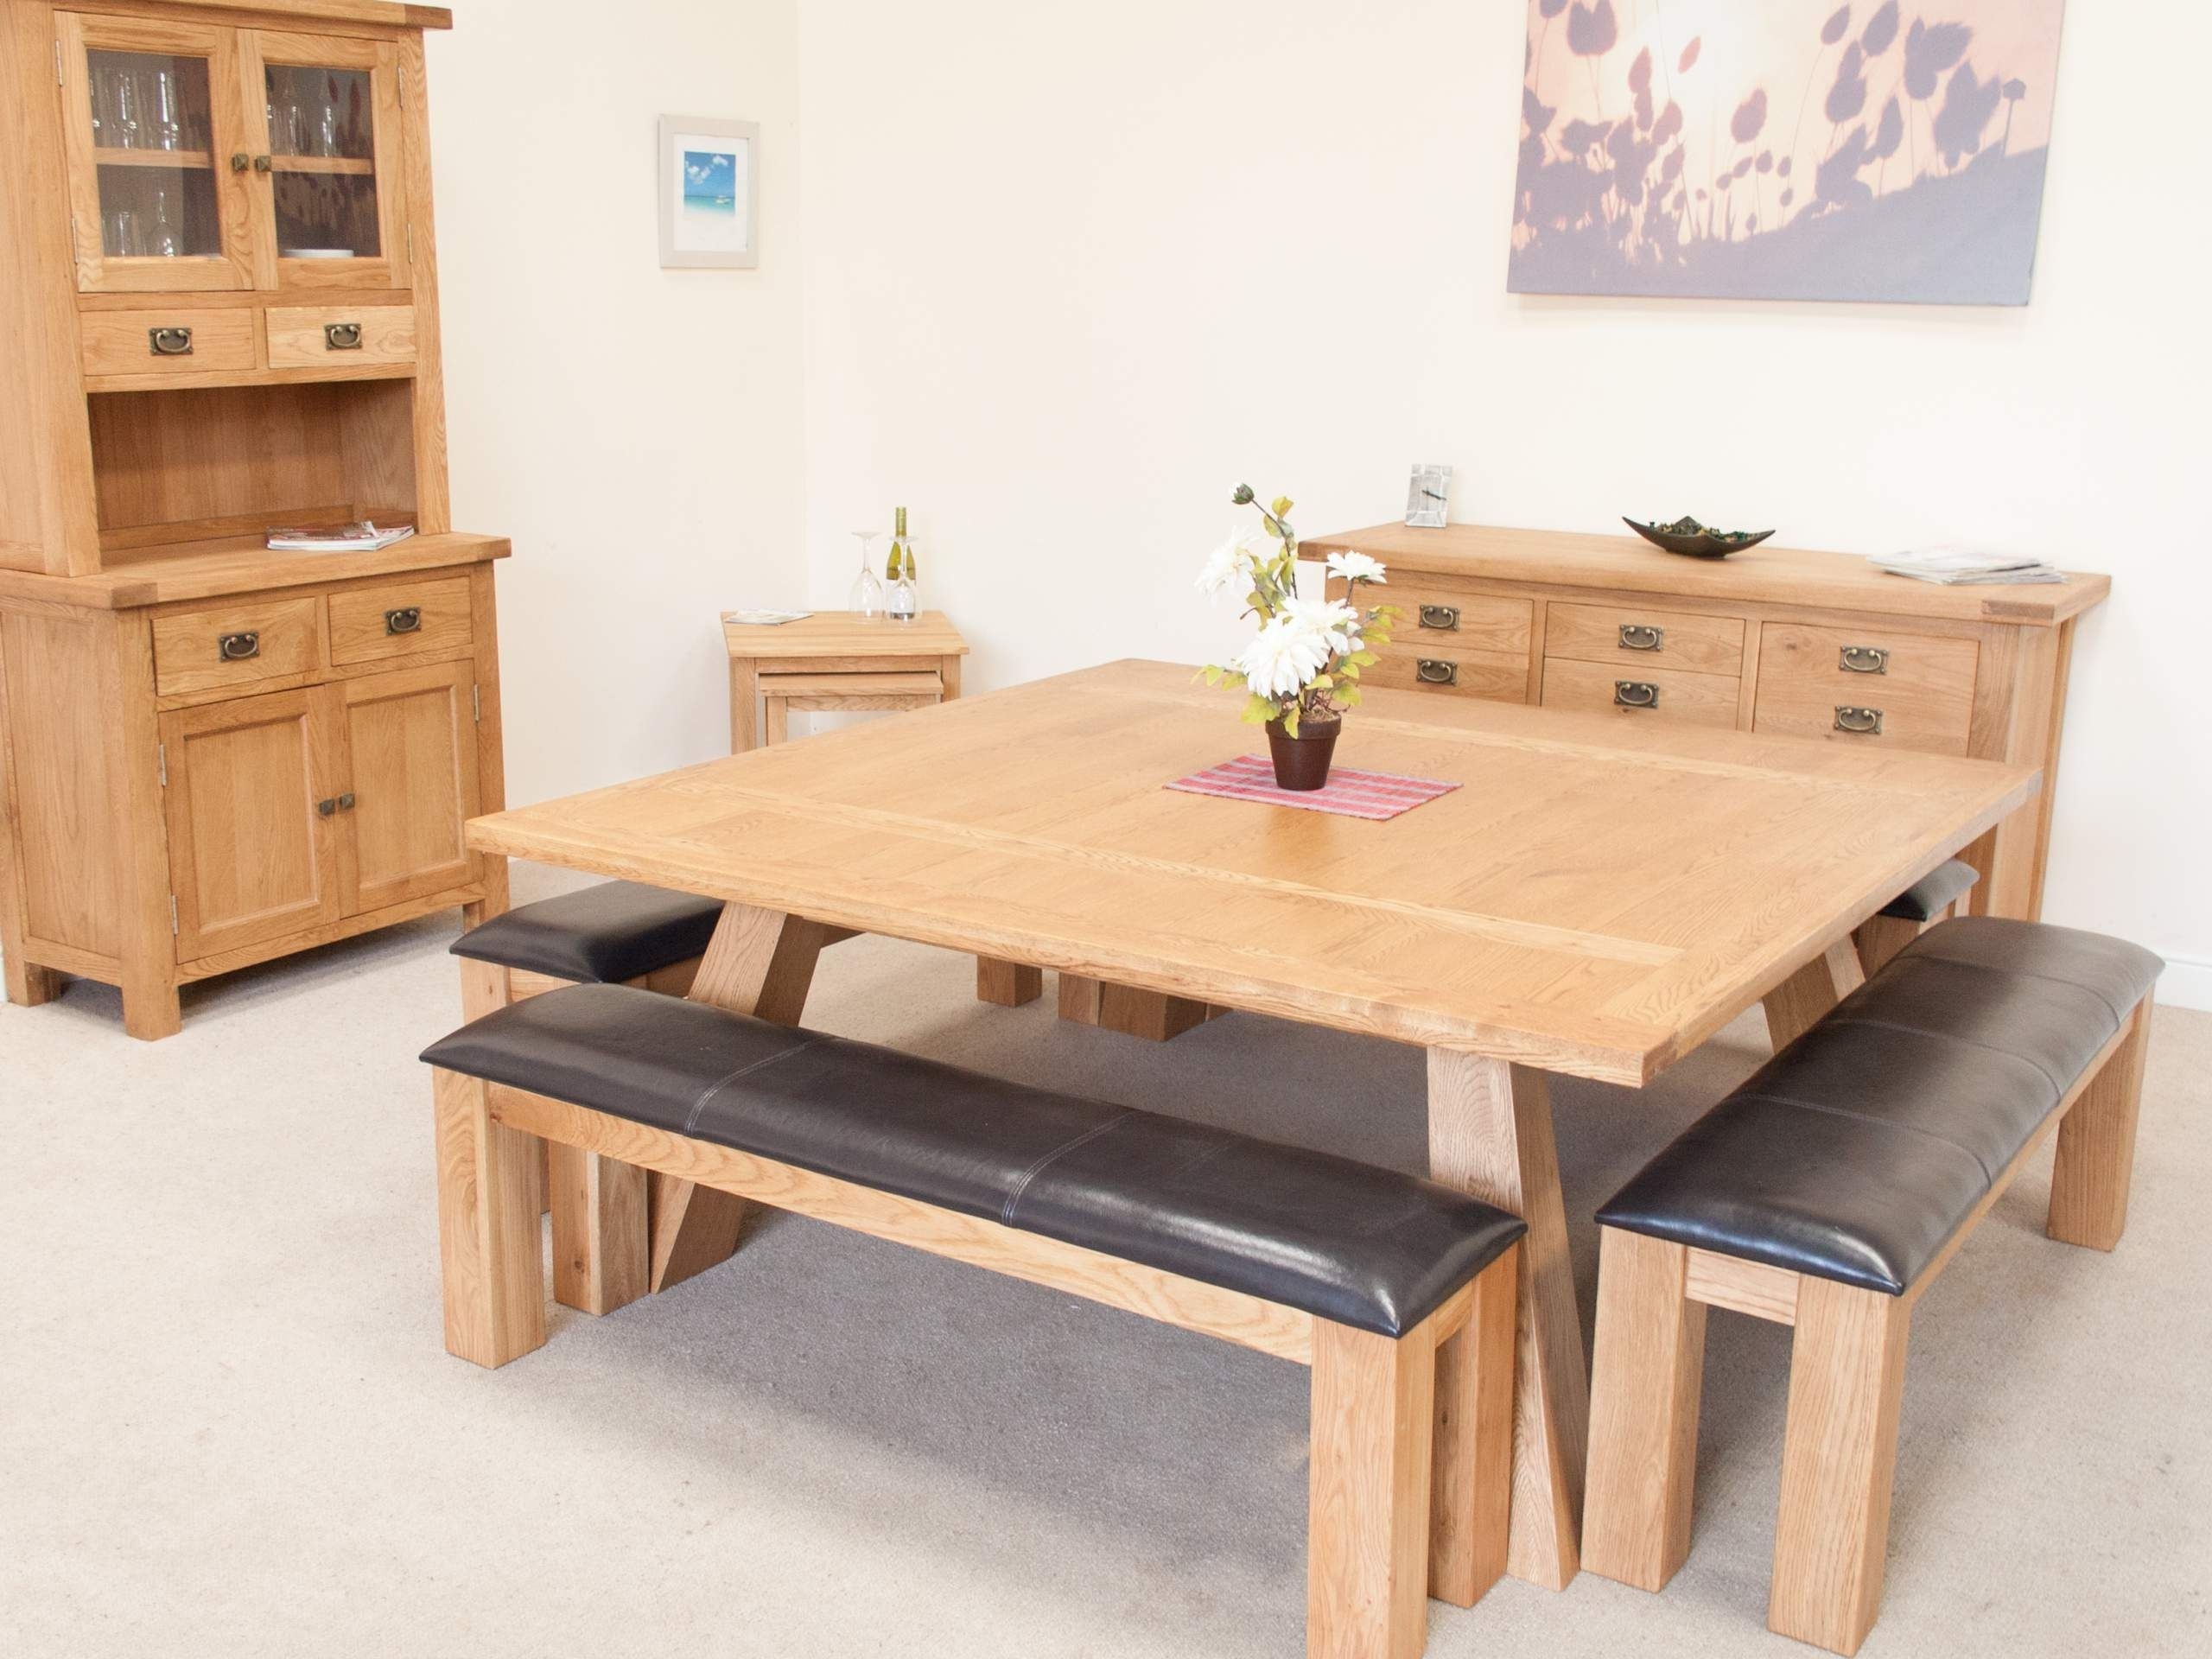 8 seater oak dining table